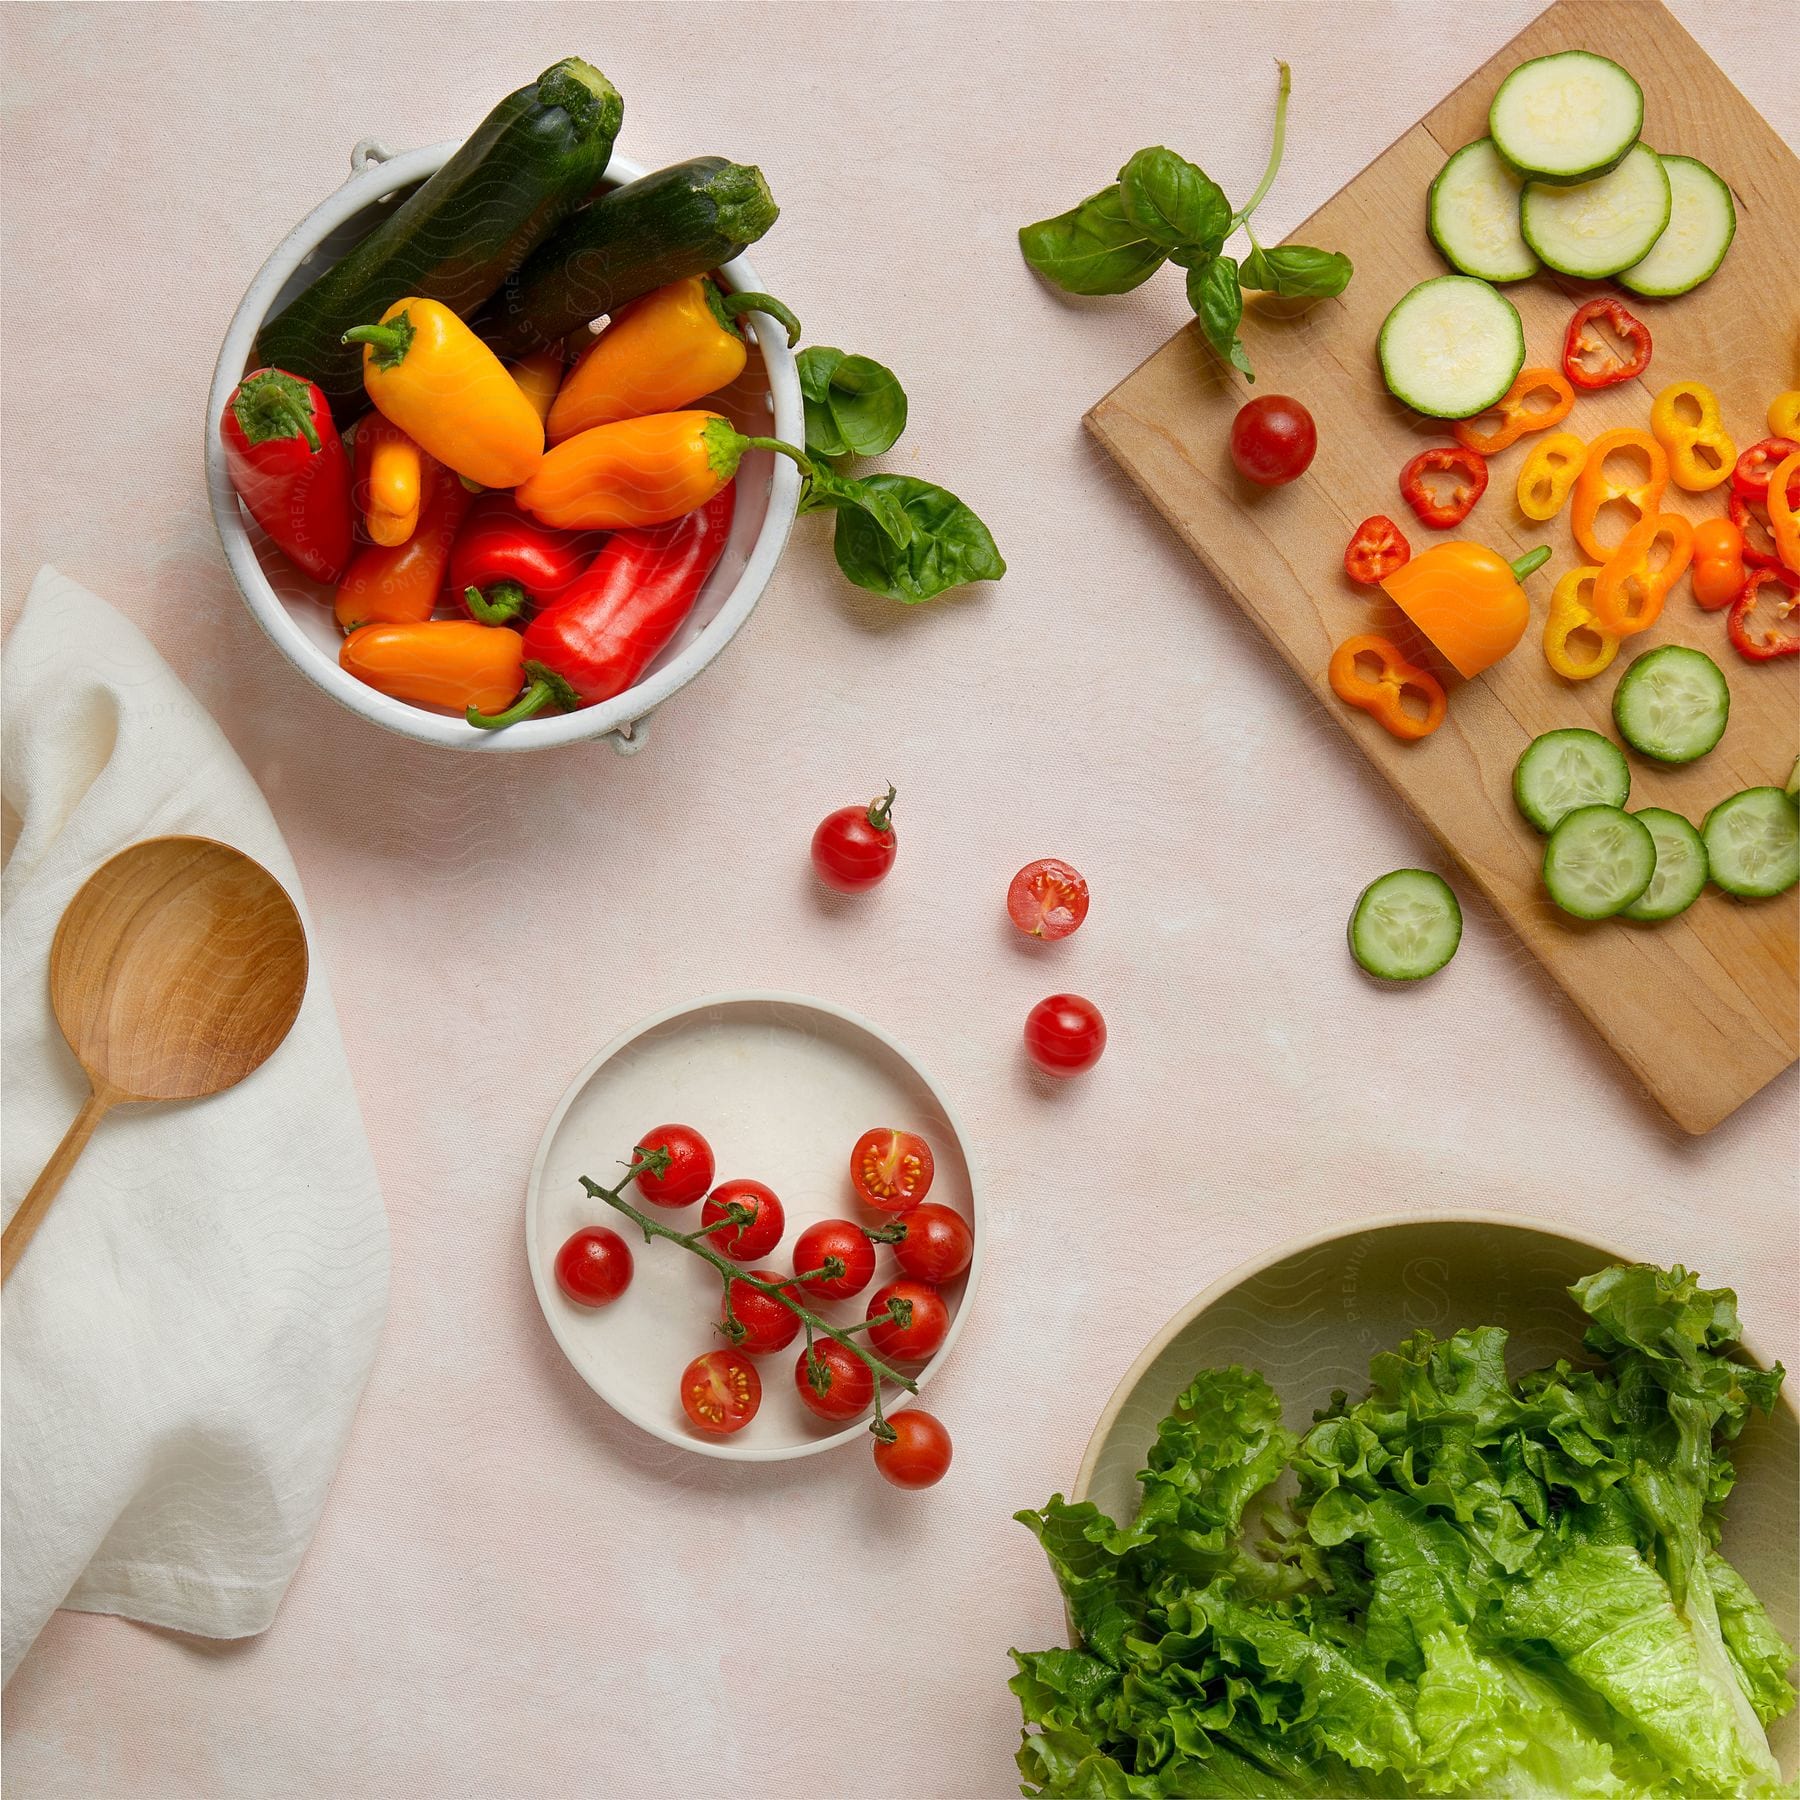 Fresh vegetables, including tomatoes, peppers, lettuce, and cucumbers, are arranged on different plates. Sliced pieces are placed on top of a wooden cutting board, with a wooden spoon resting on a napkin nearby.